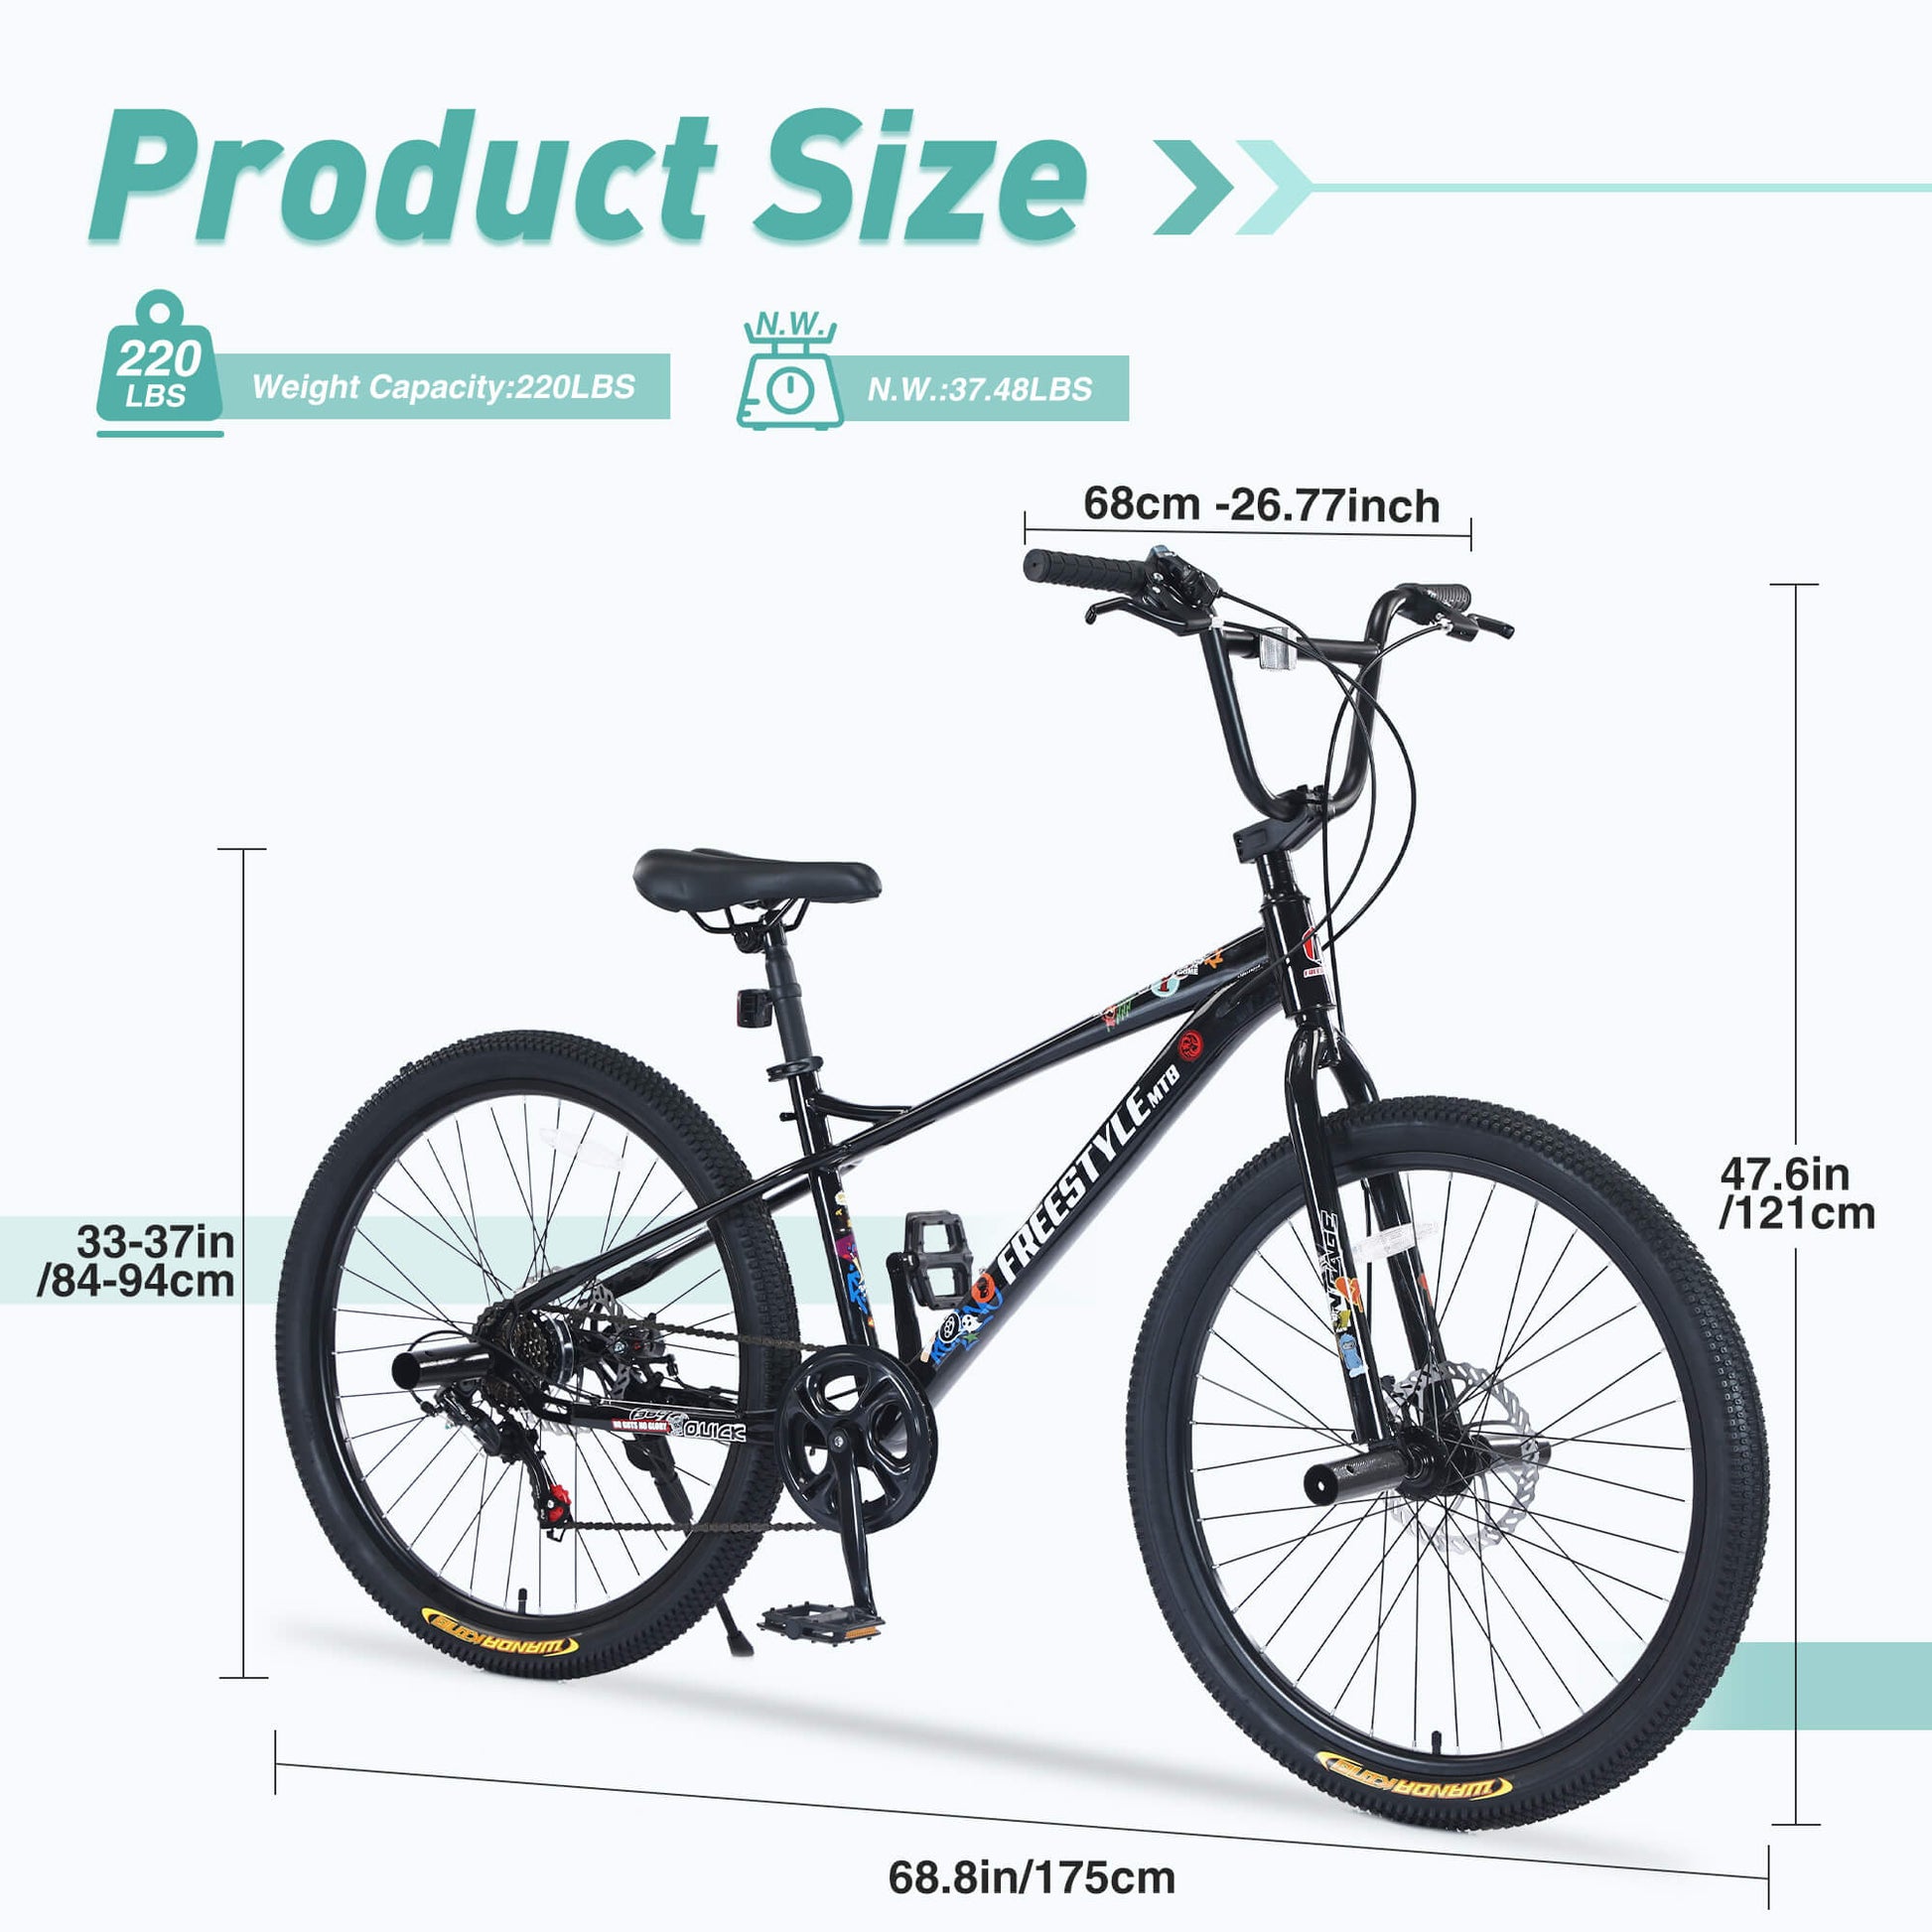 Product Size Rock-Rod 26"×2.35” Mountain Bike For Child/Youth - Hycline